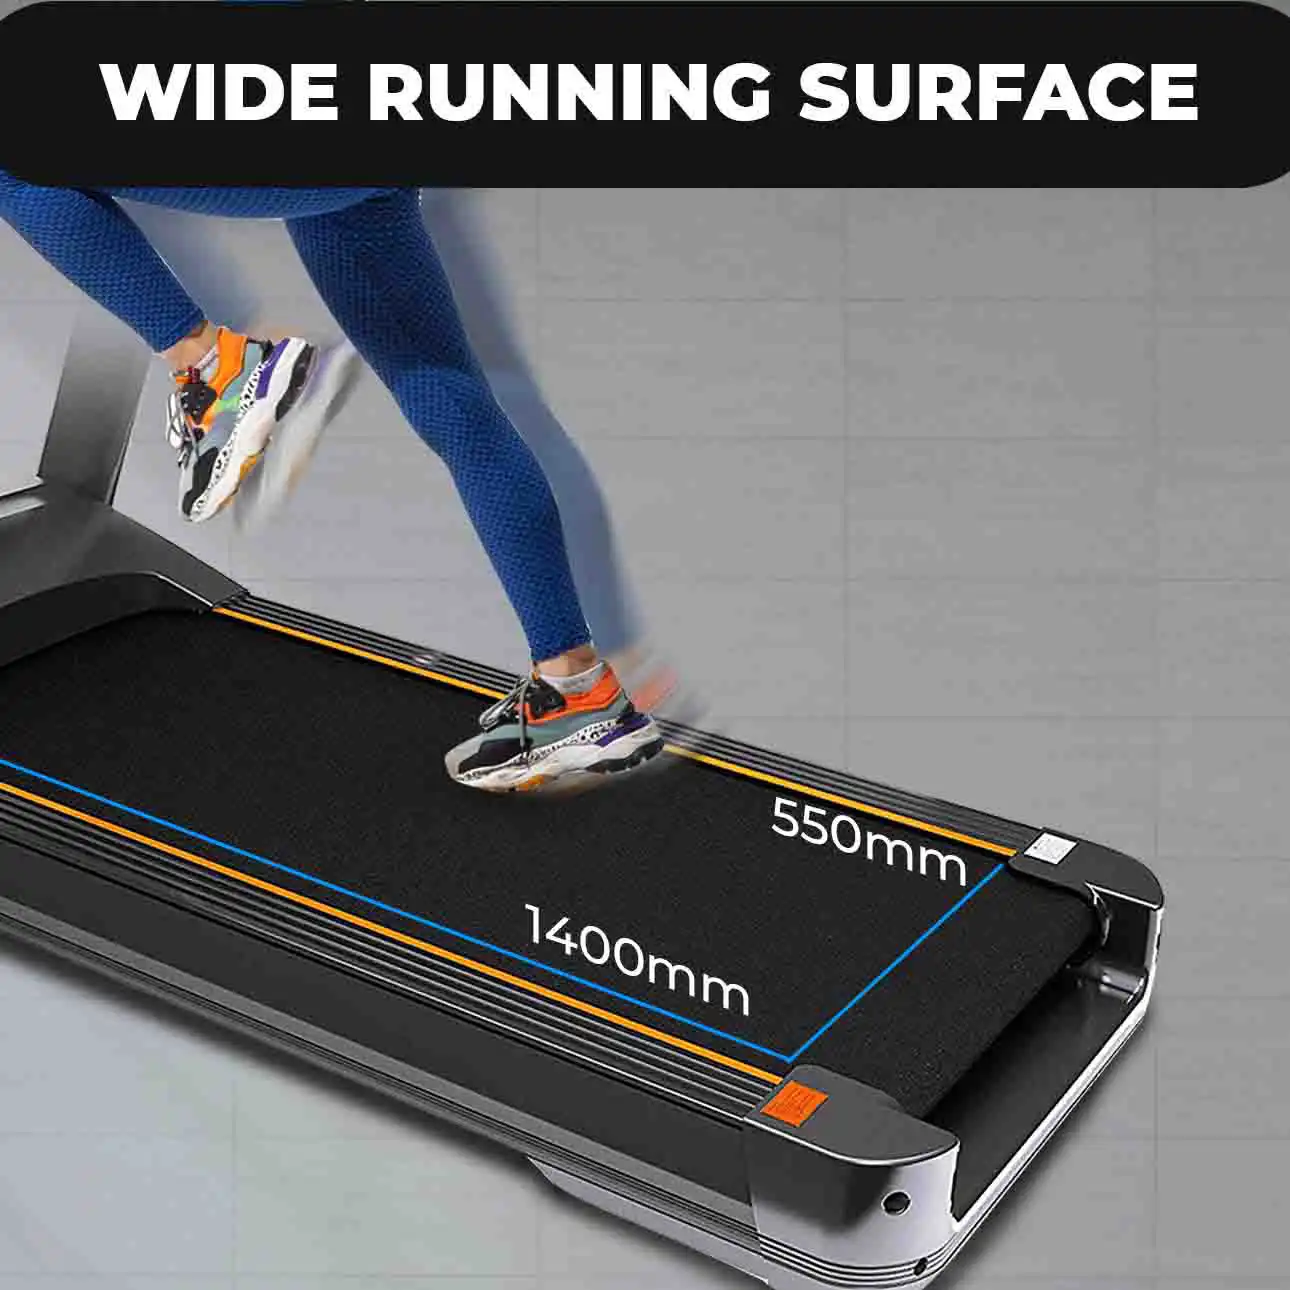 Durafit Royal Treadmill with Wide Running Surface